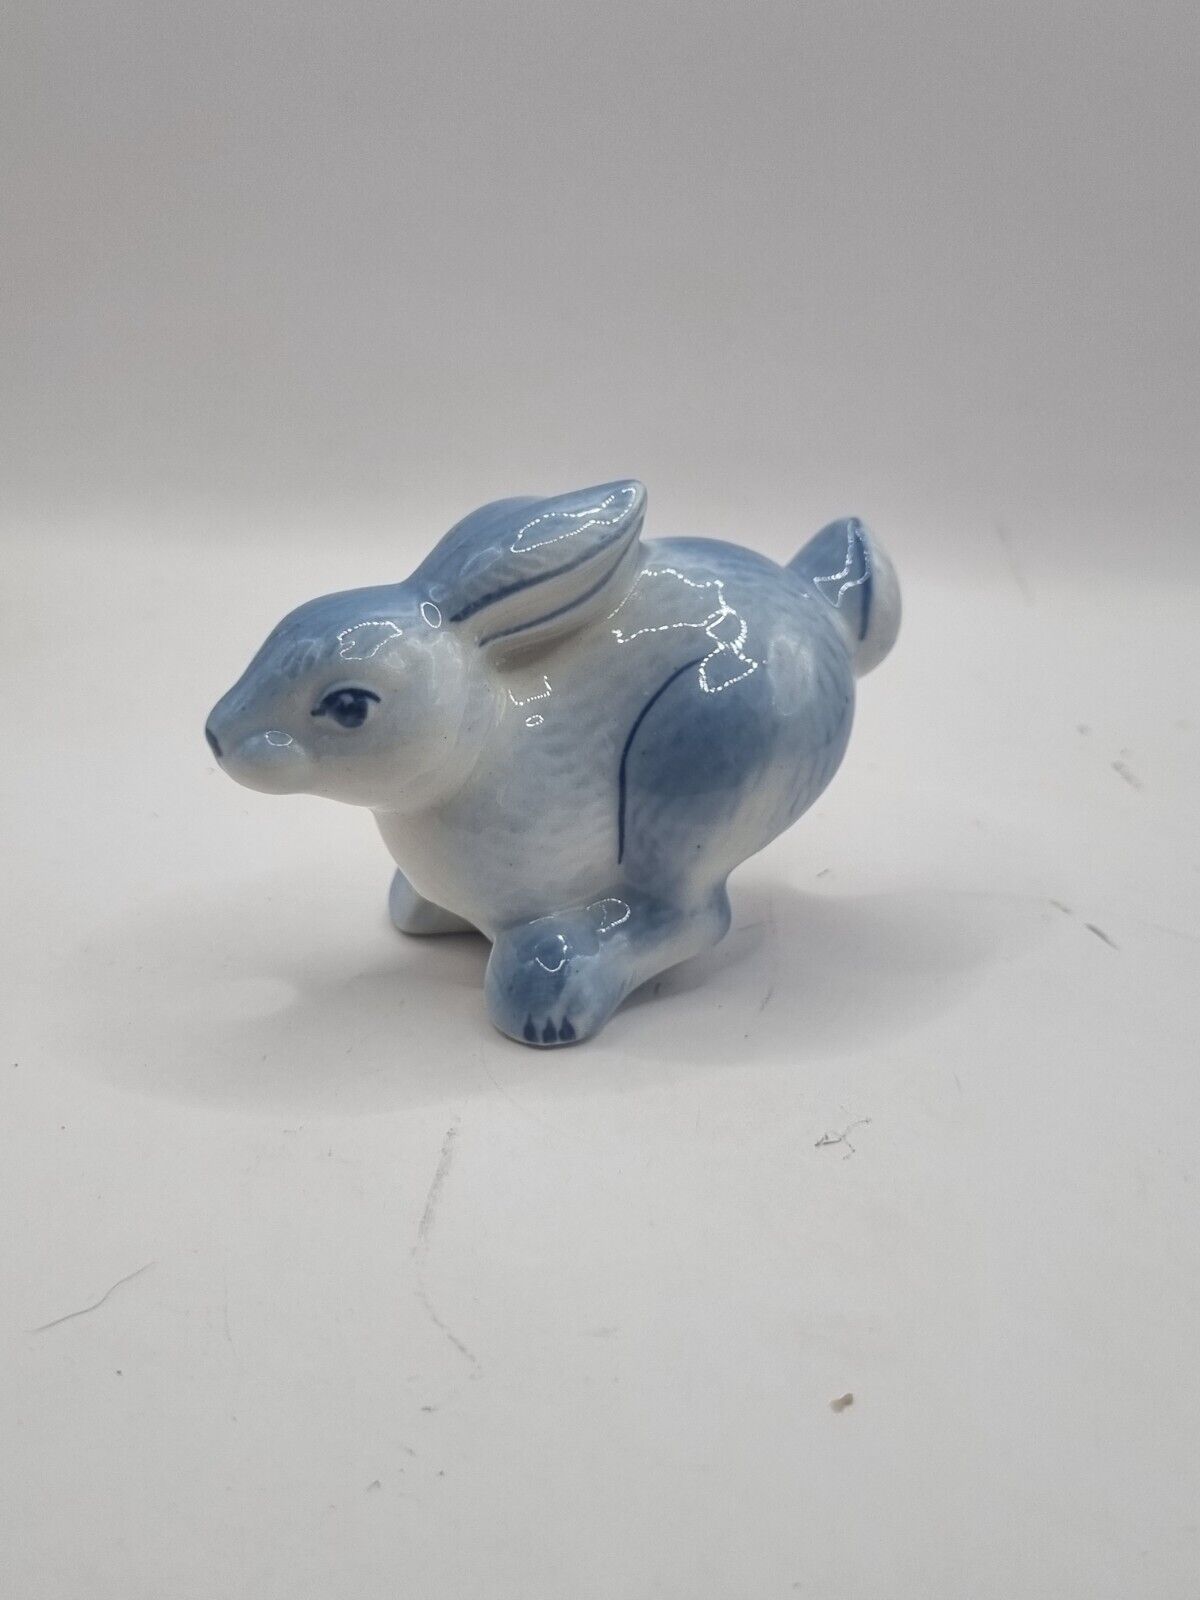 A Small Hand-Painted Porcelain Rabbit Figurine Statue Signed Decorative